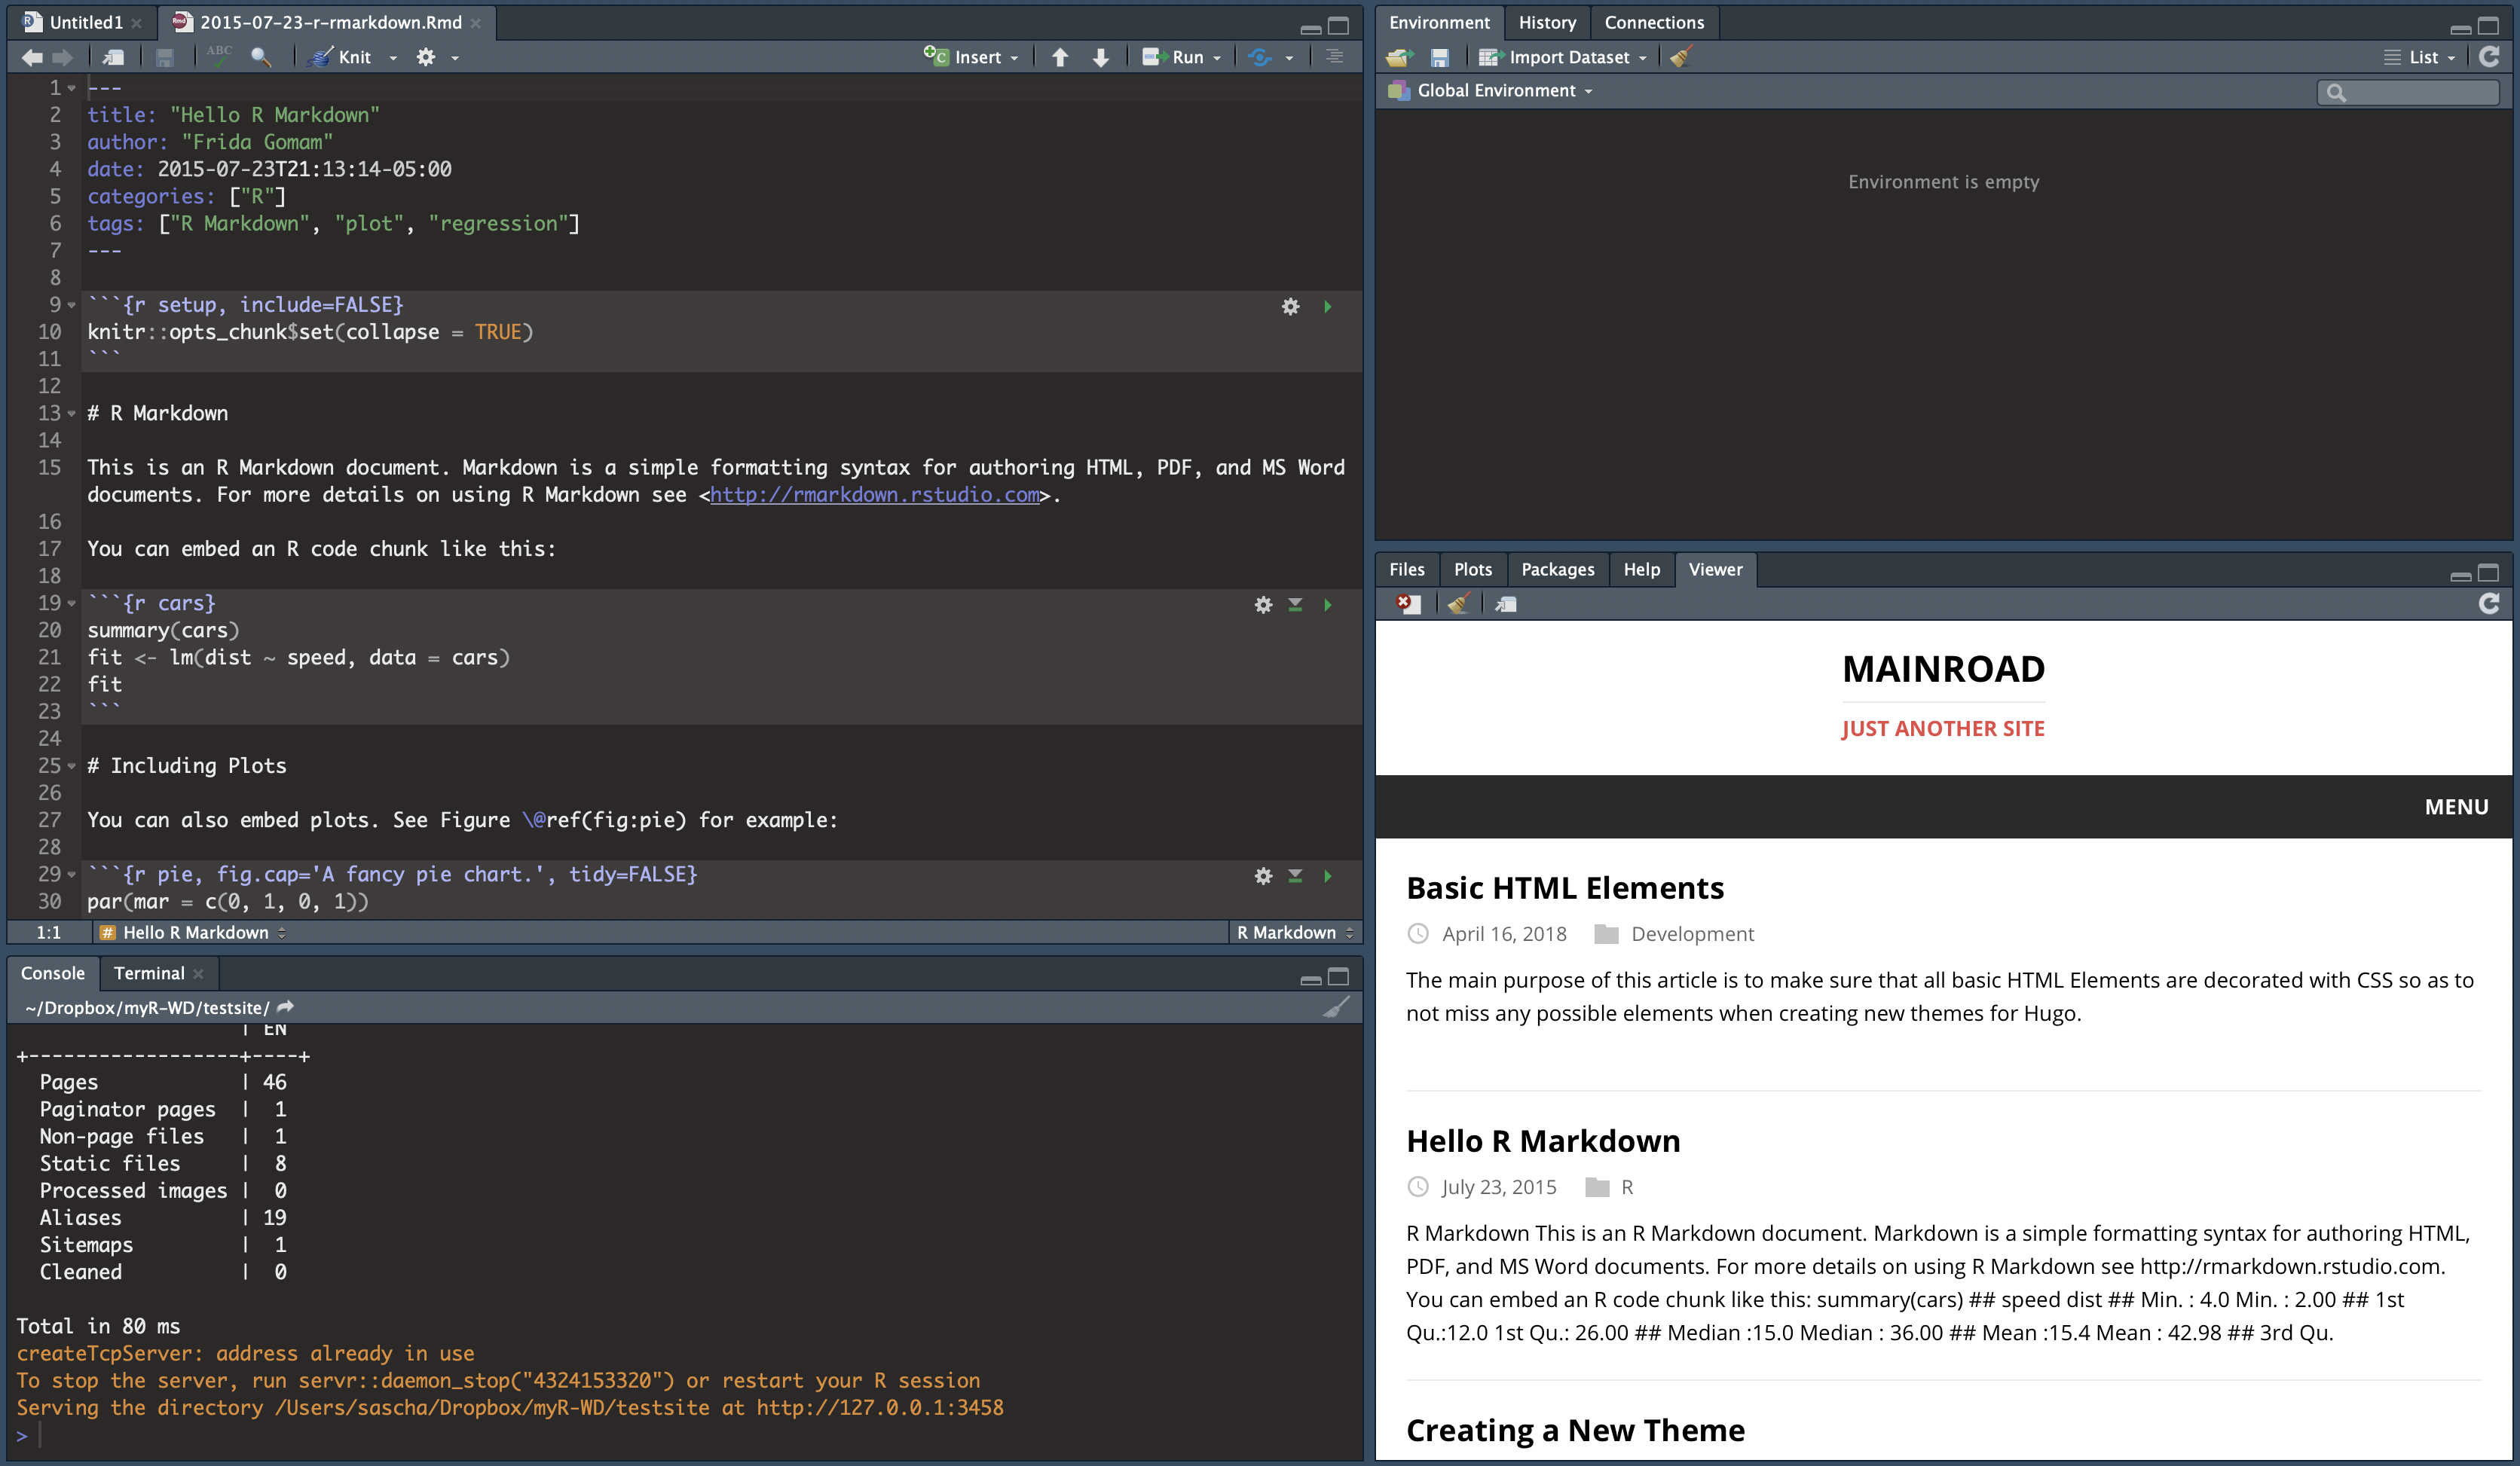 This is what your RStudio window should look like after creating a new site with the „mainroad“ theme.